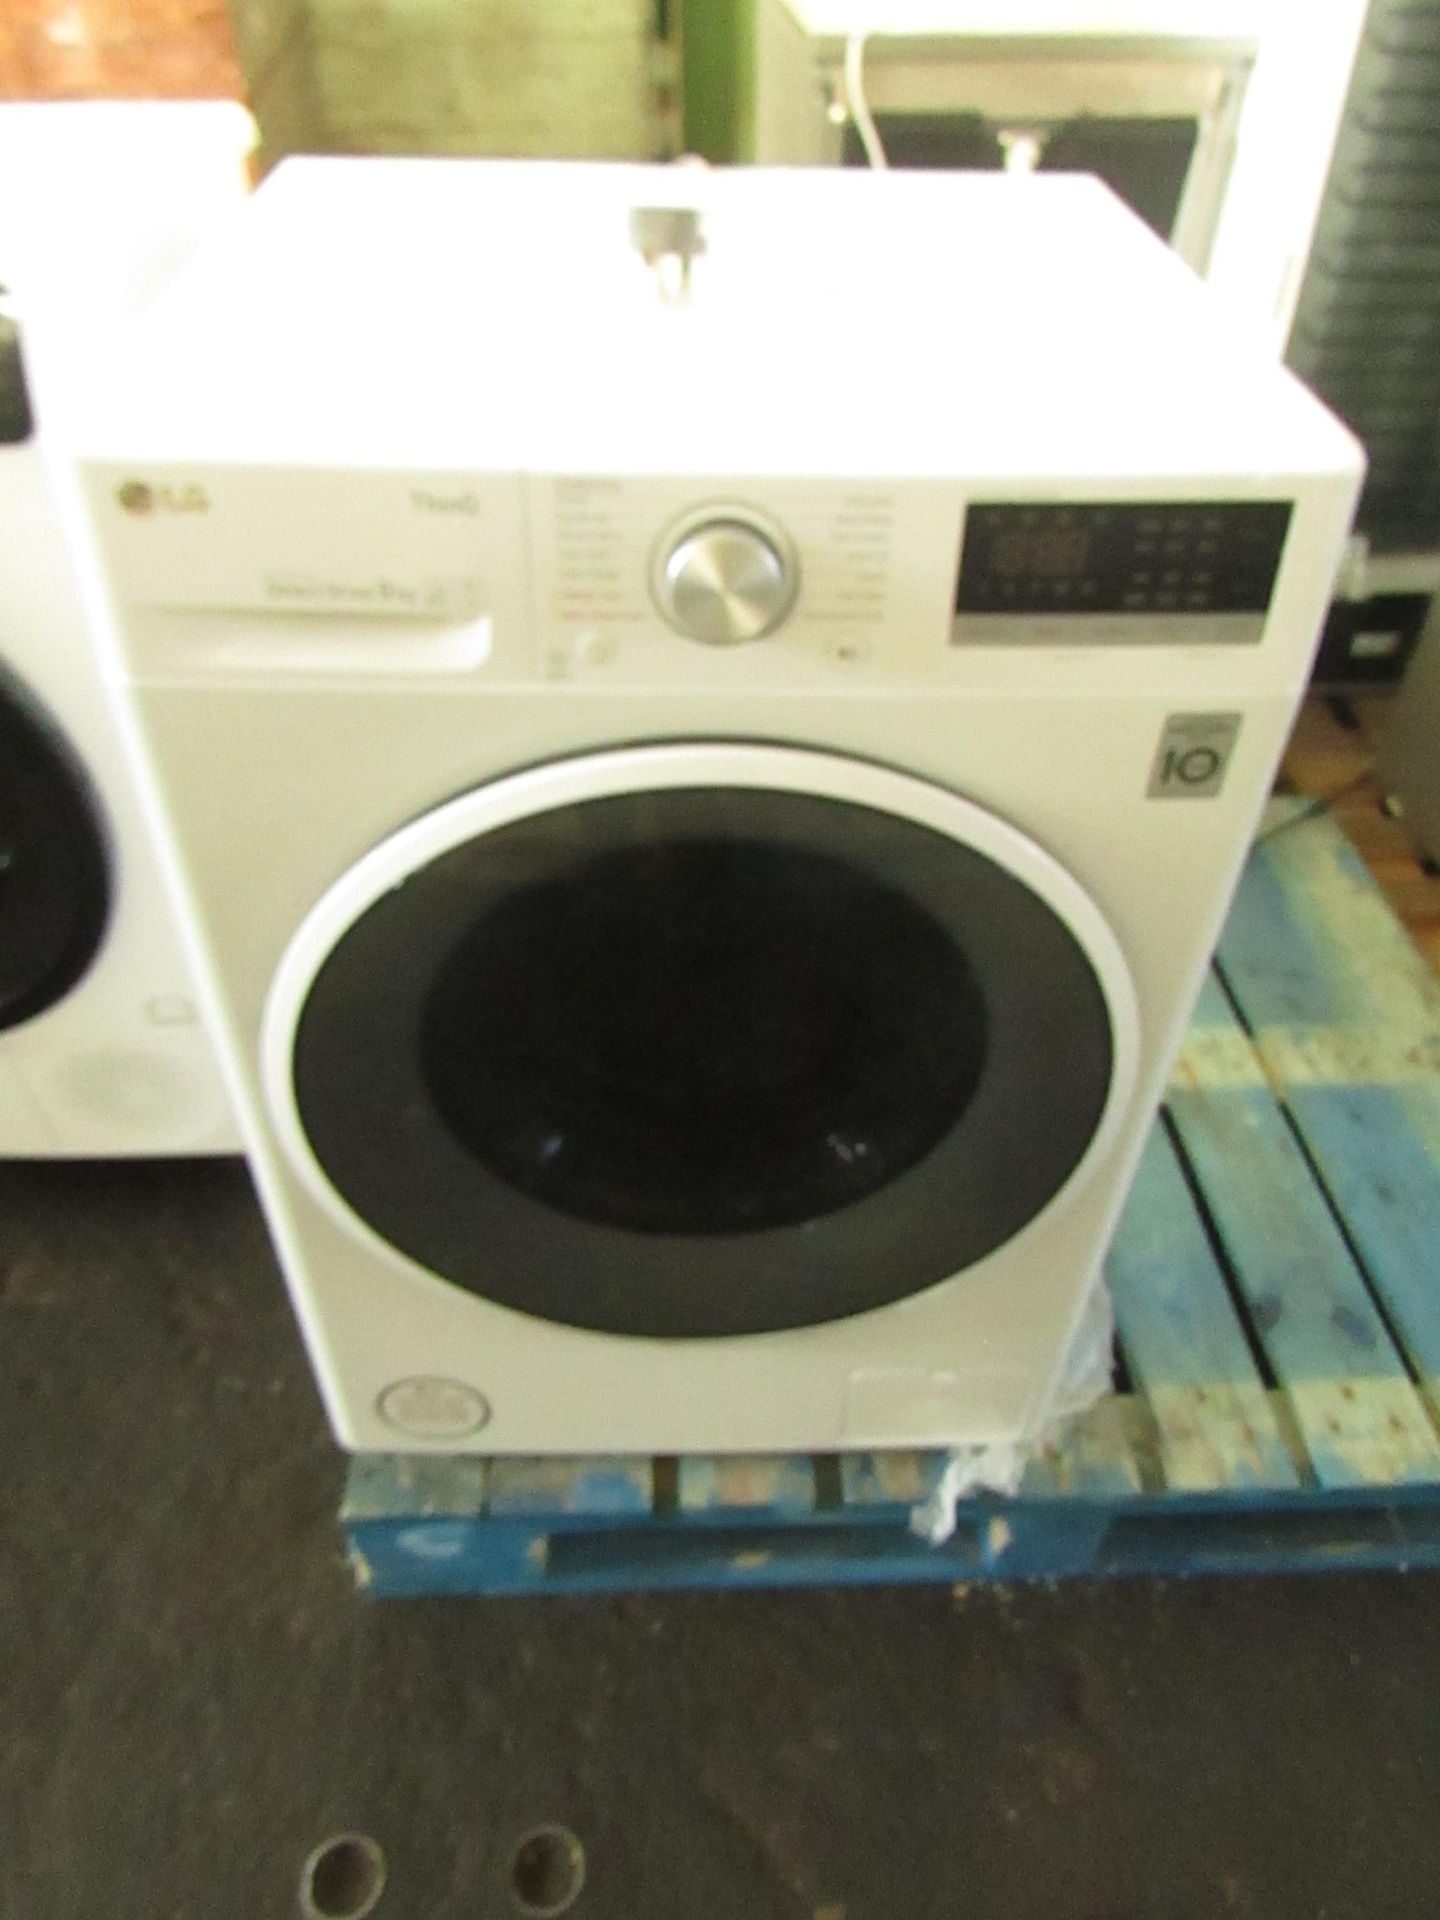 LG F4V508WSE 9KG washing machine, Powers on and spins but we have not tried any other functions